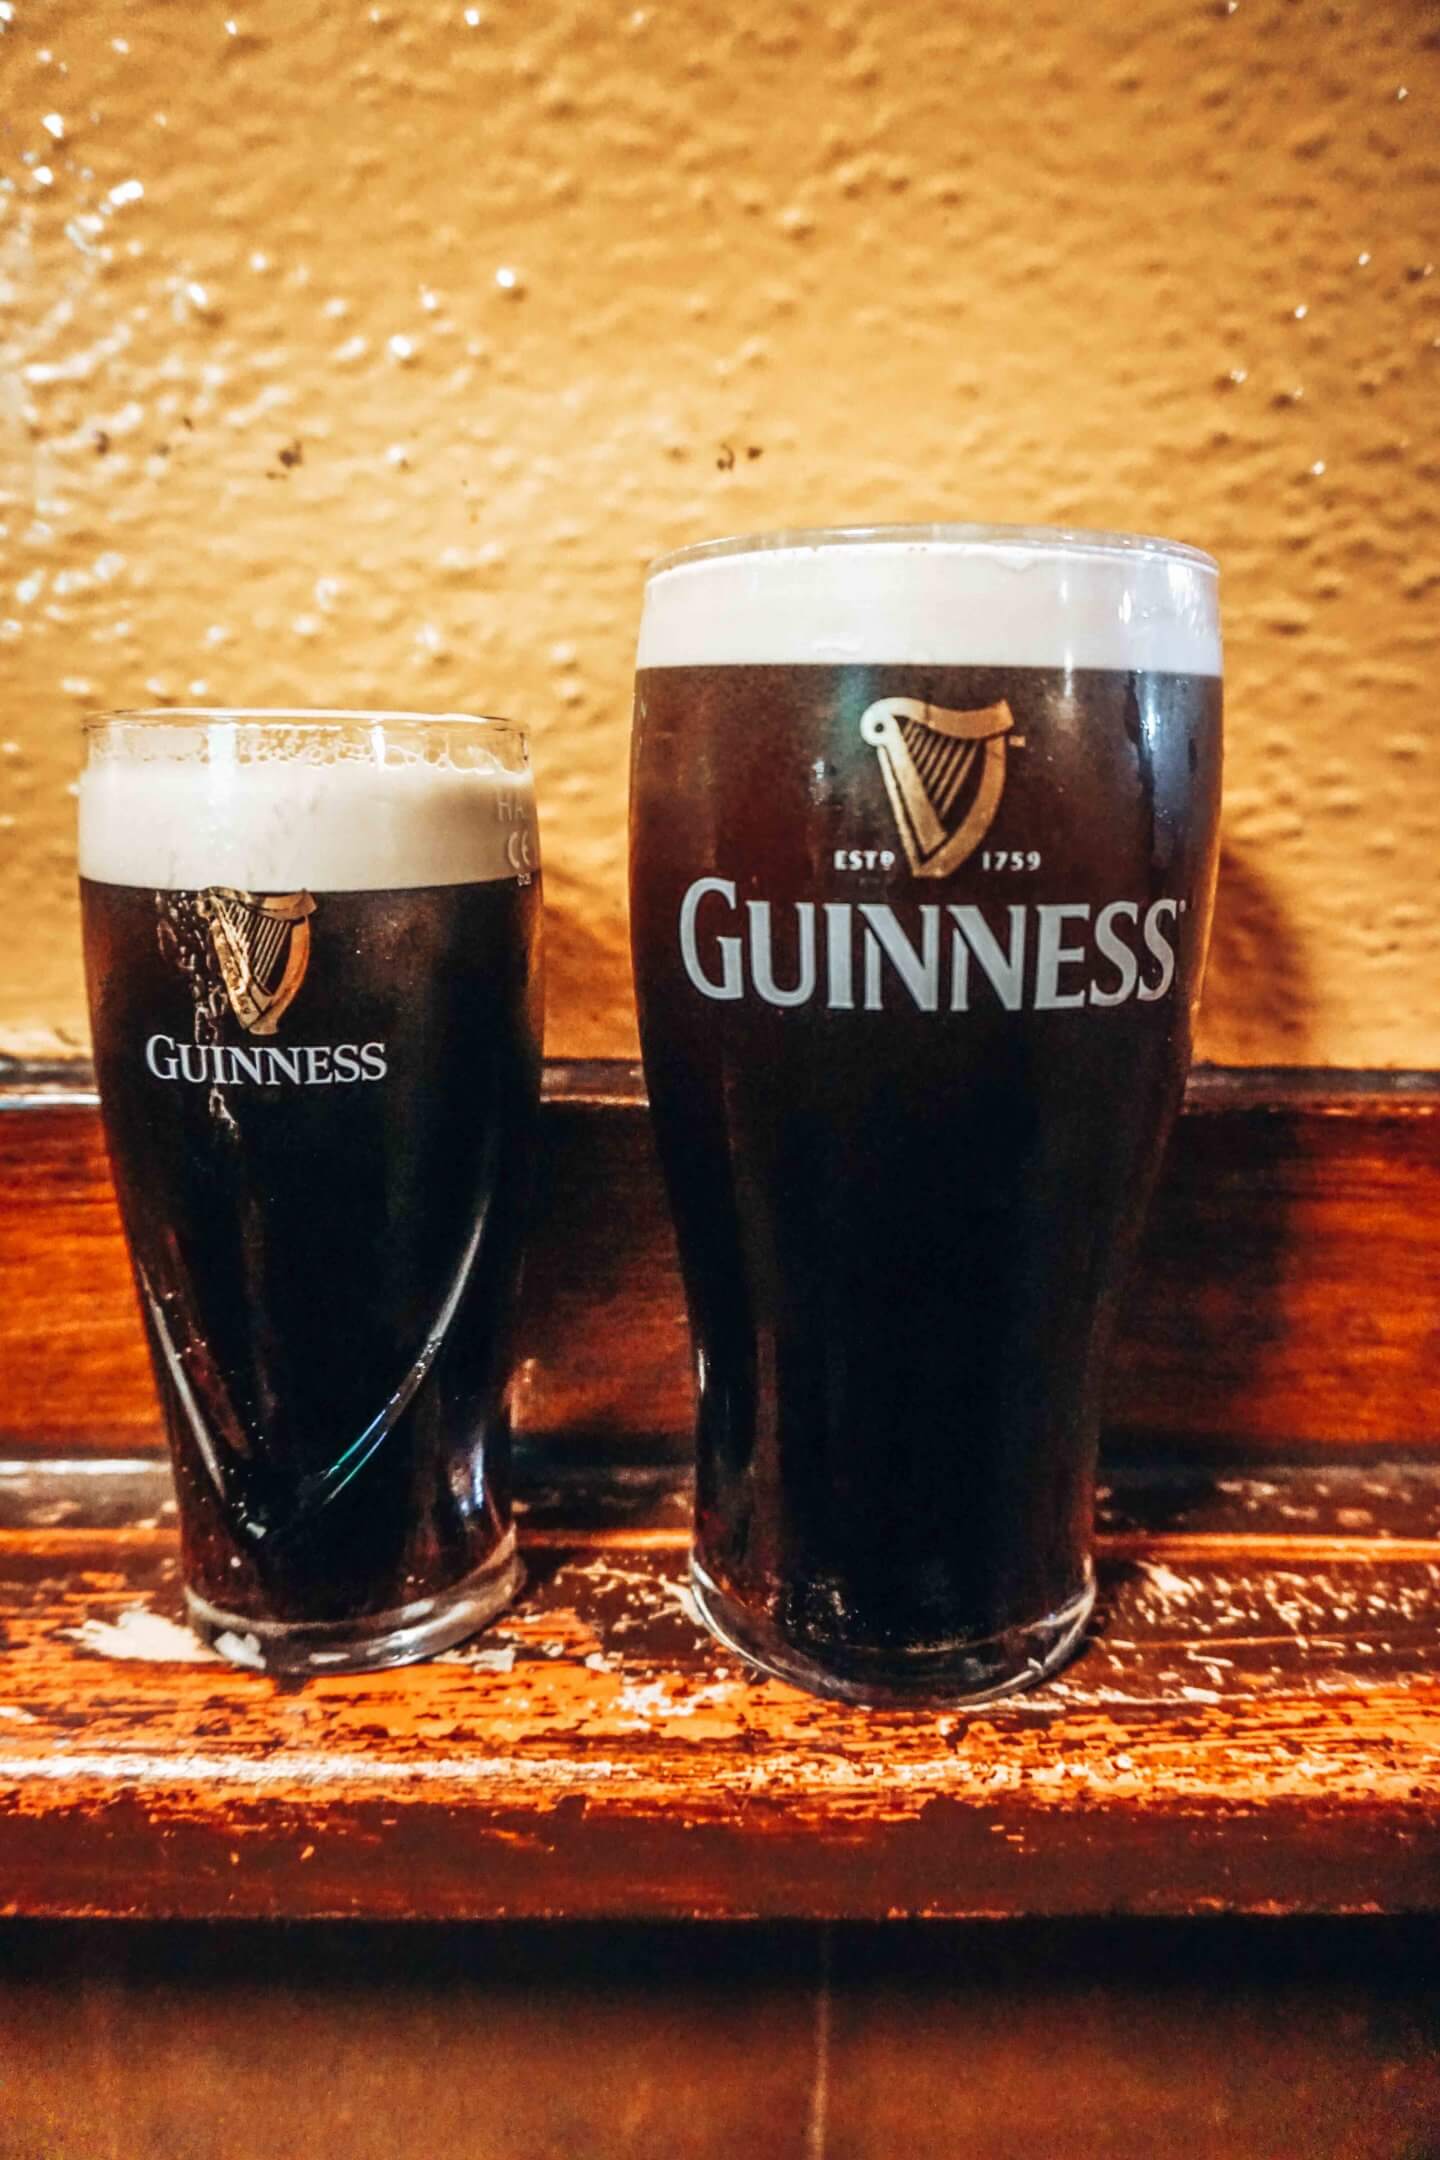 Celebrating St. Patrick’s Day in Dublin with two Guinness beers